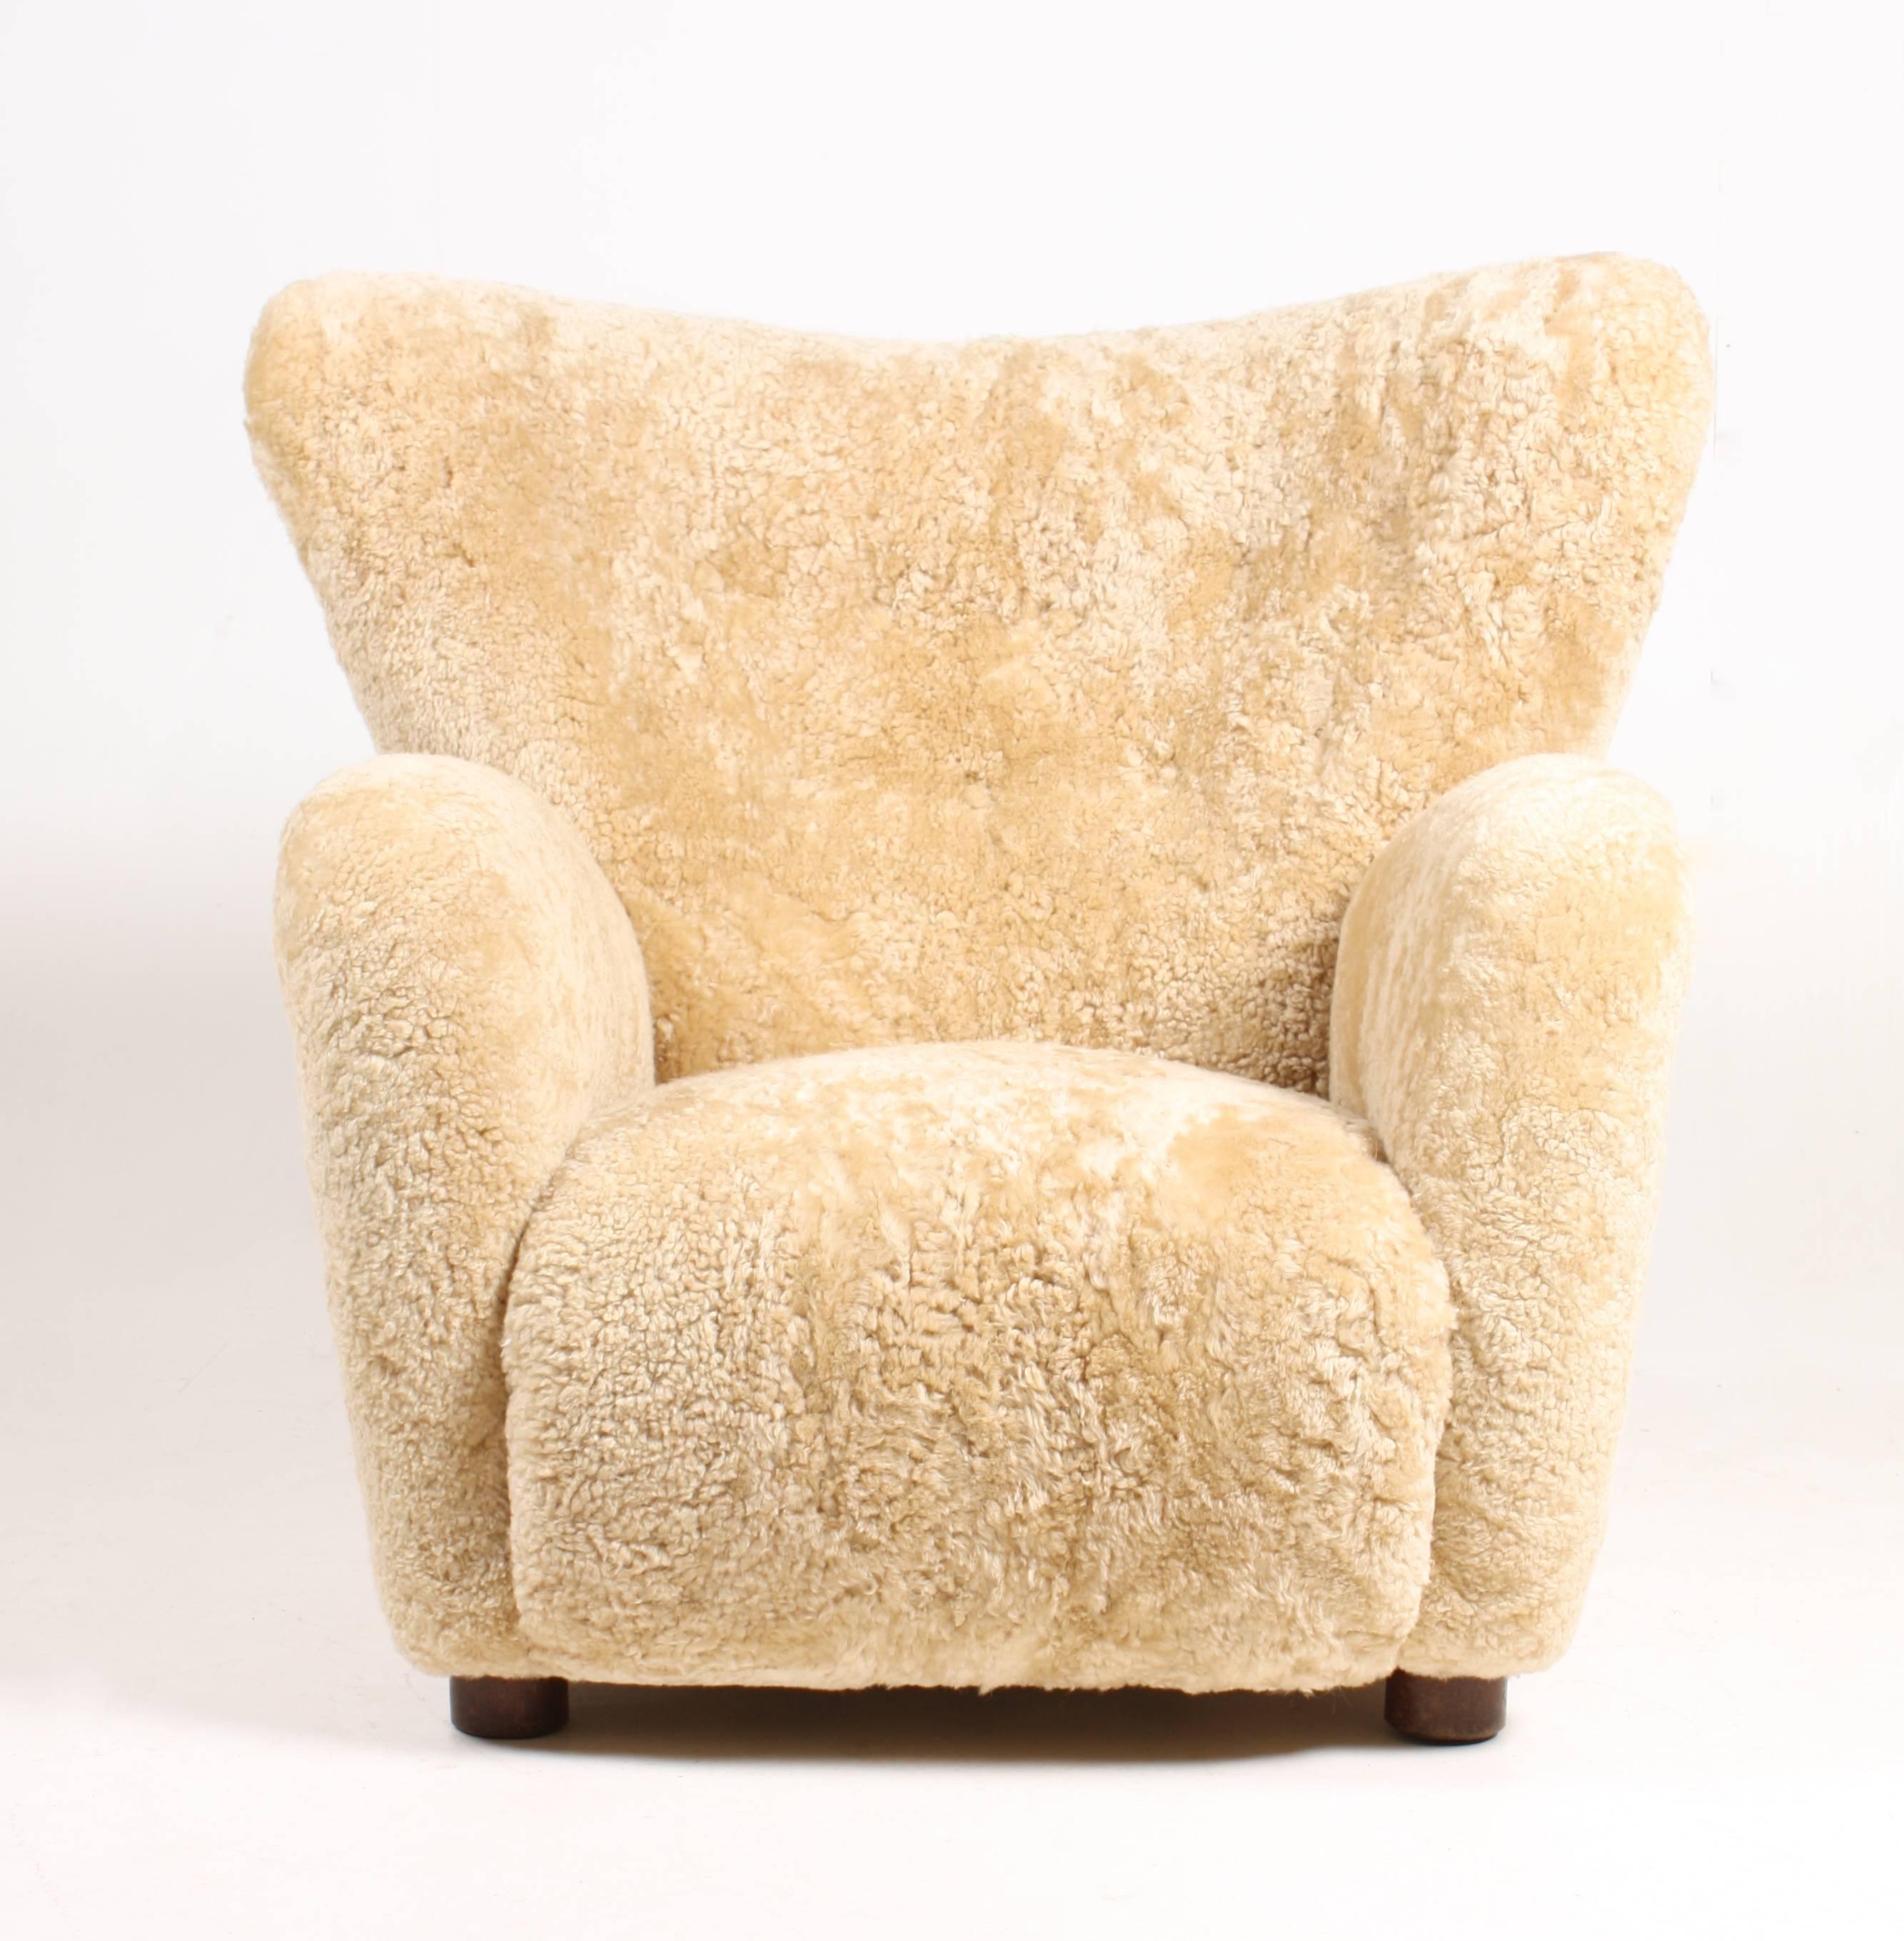 Large and comfortable easy chair build on a wood frame, upholstered in shearling from Scandinavian sheep. Attributed to Danish architect Mogens Lassen. Made in Denmark in the 1940s. Great condition.